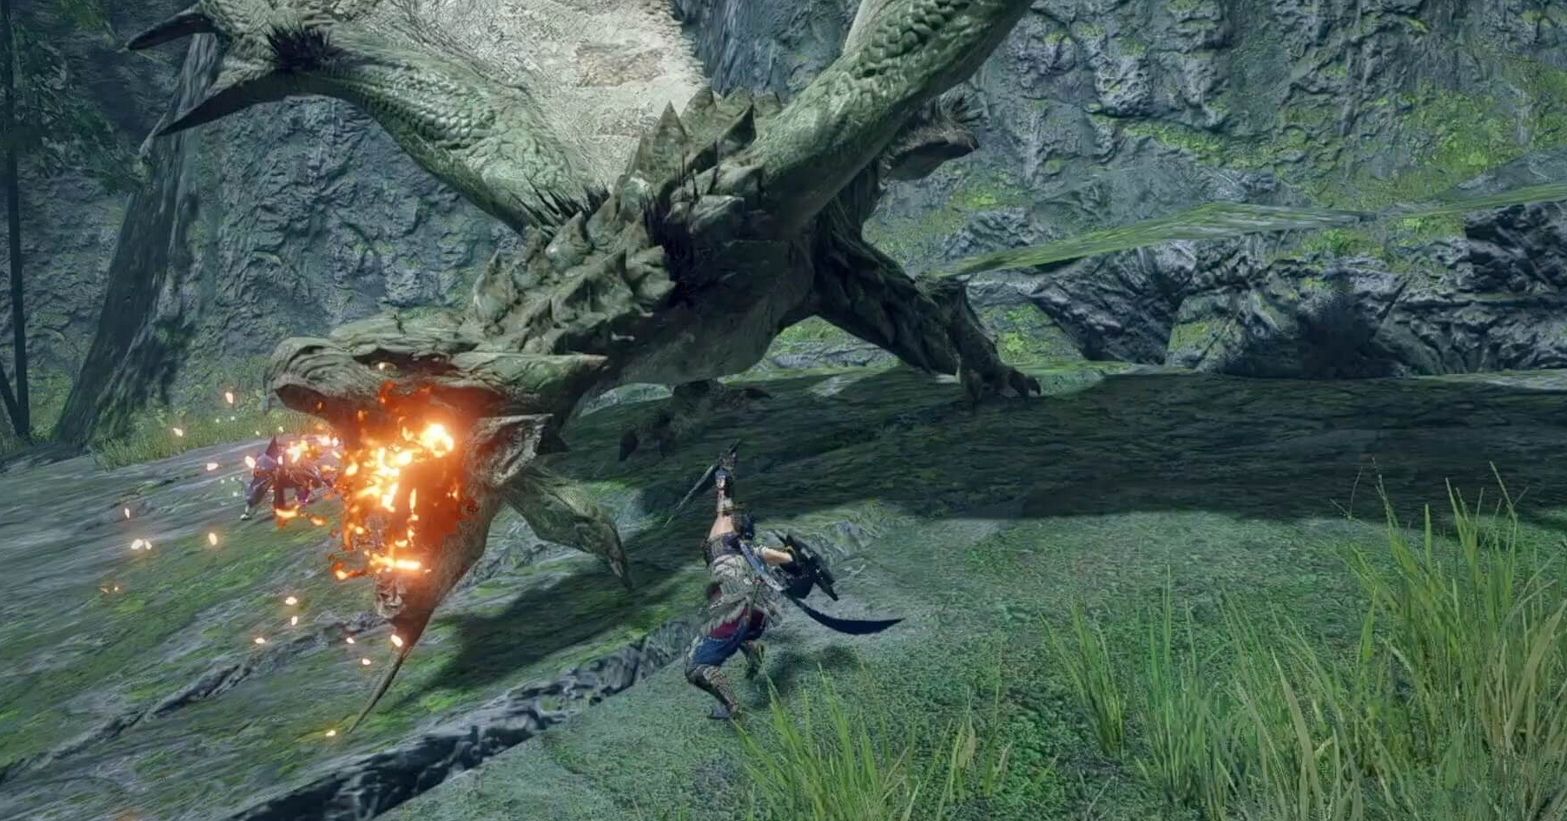 Hunting a Rathian in Monster Hunter Rise. A green wyvern spits fire. A player character with a sword and shield swings at the wyvern.